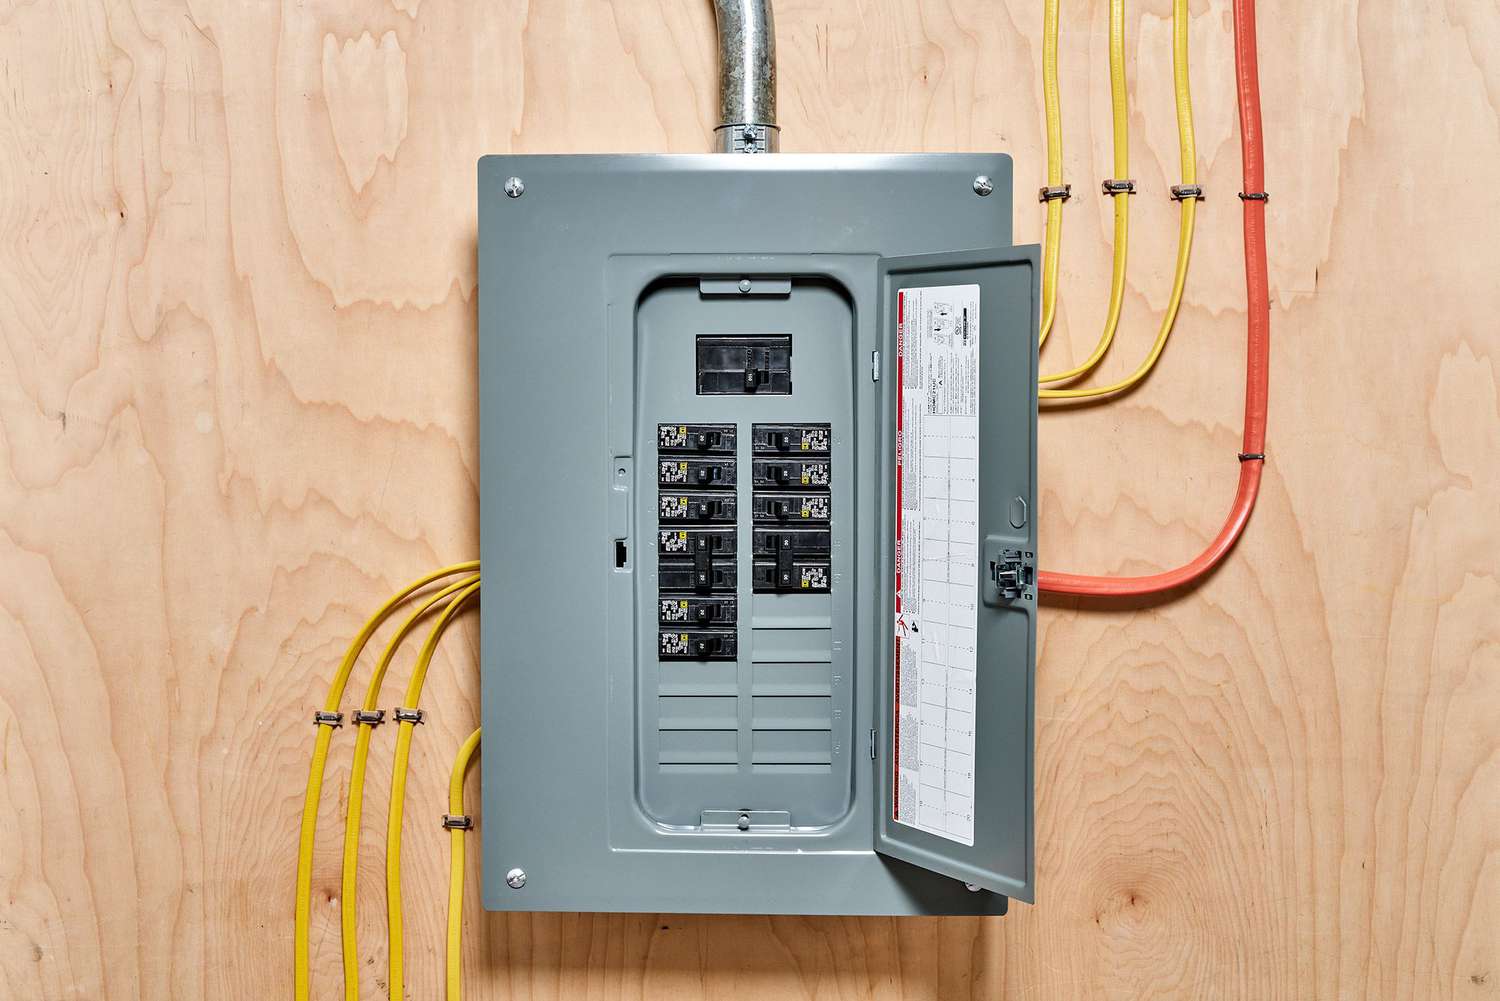 How To Calculate Your Home’s Electrical Load